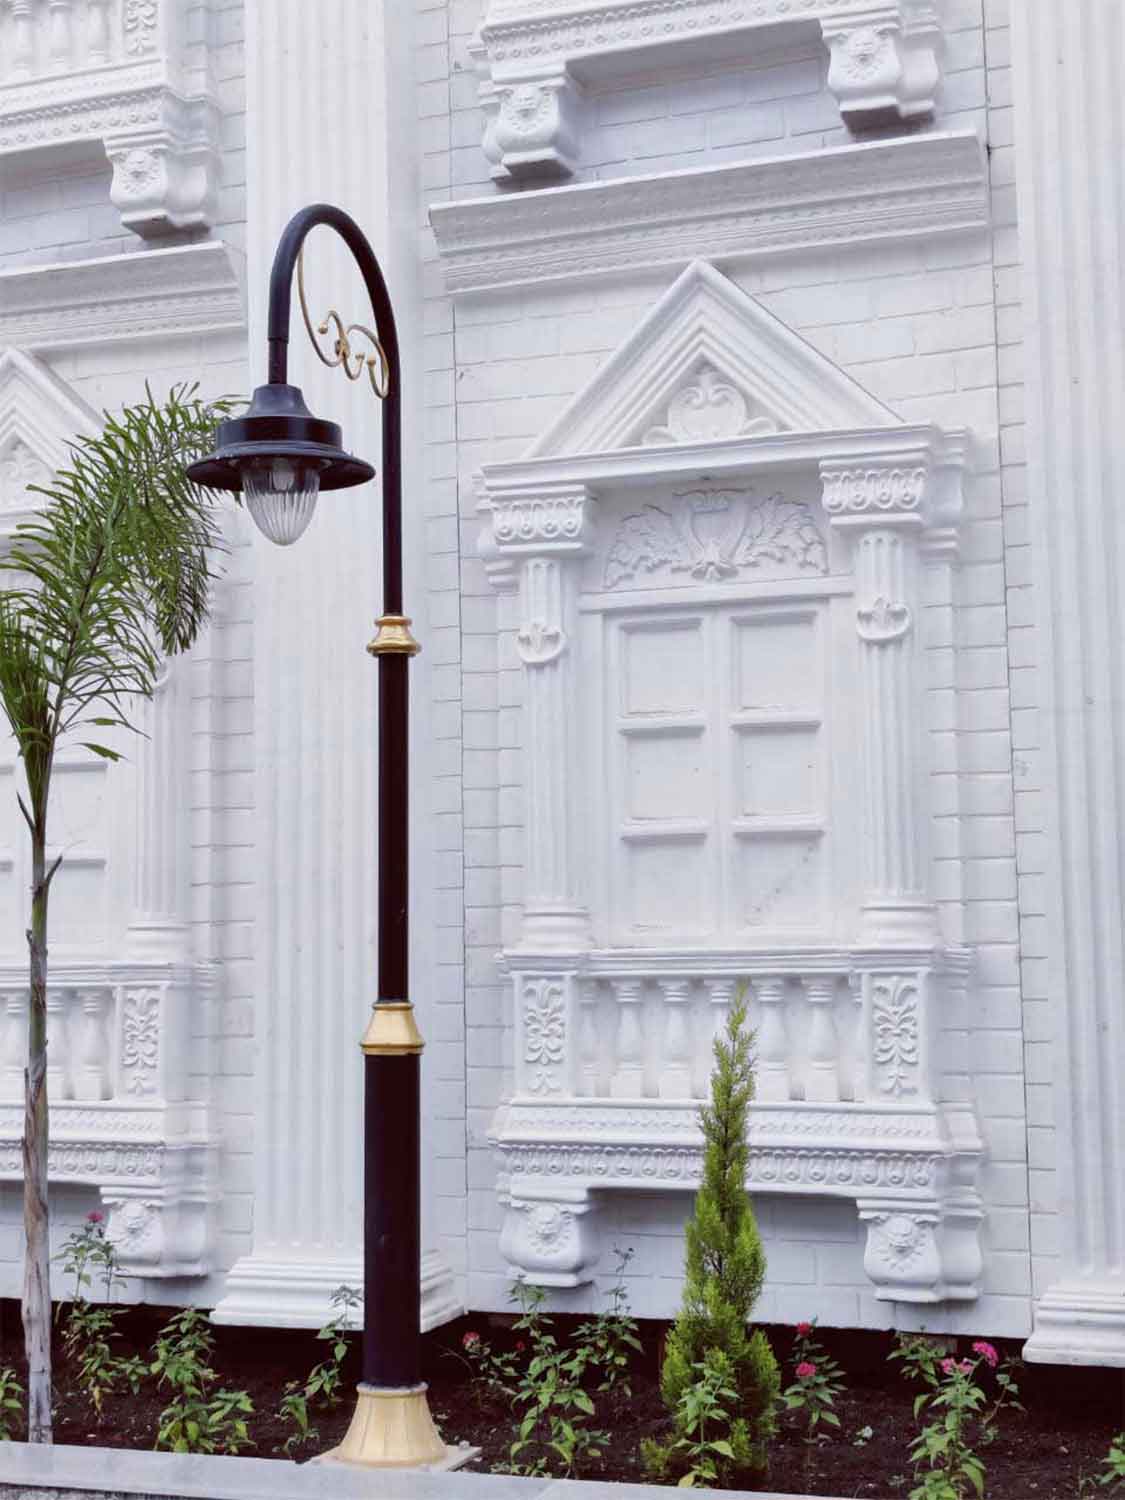 Cast Iron Pole Manufacturers, Suppliers in India